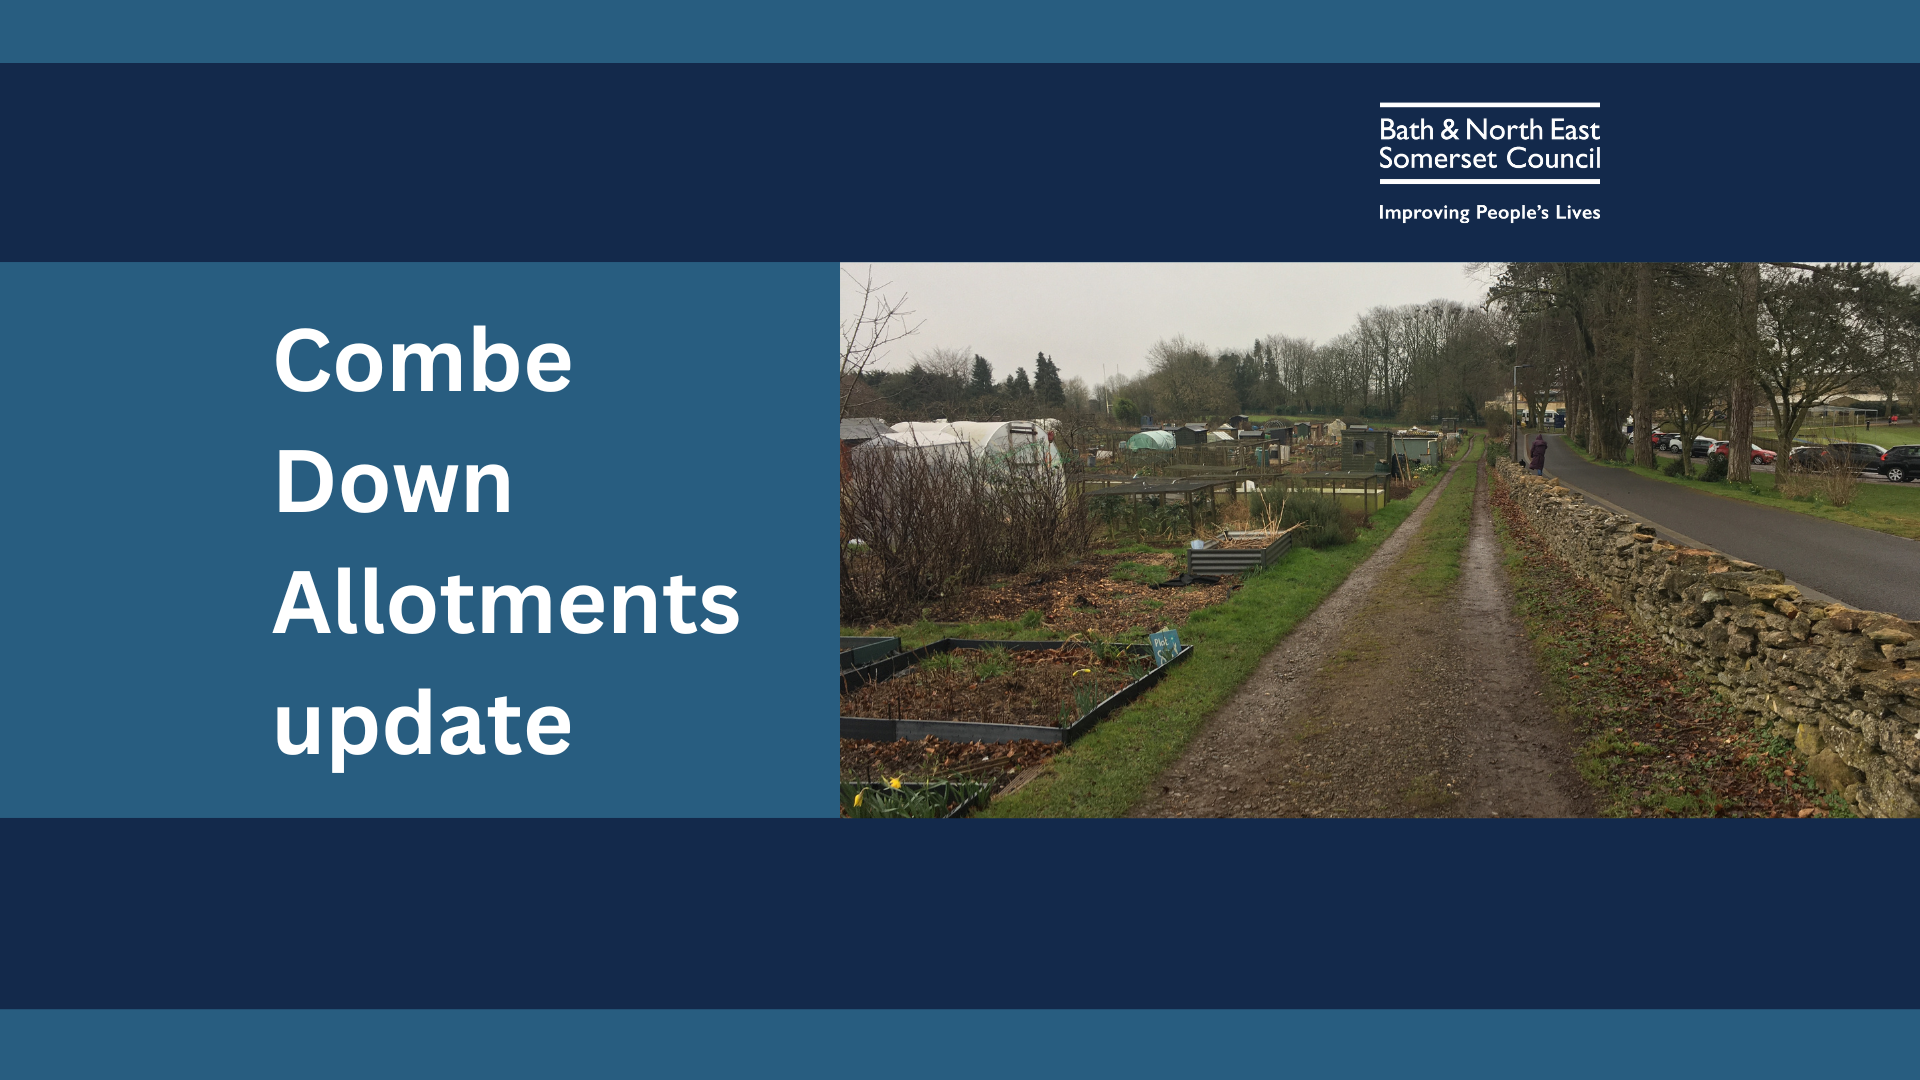 the images shows a stretch of the allotments running alongside a stone wall near a road  